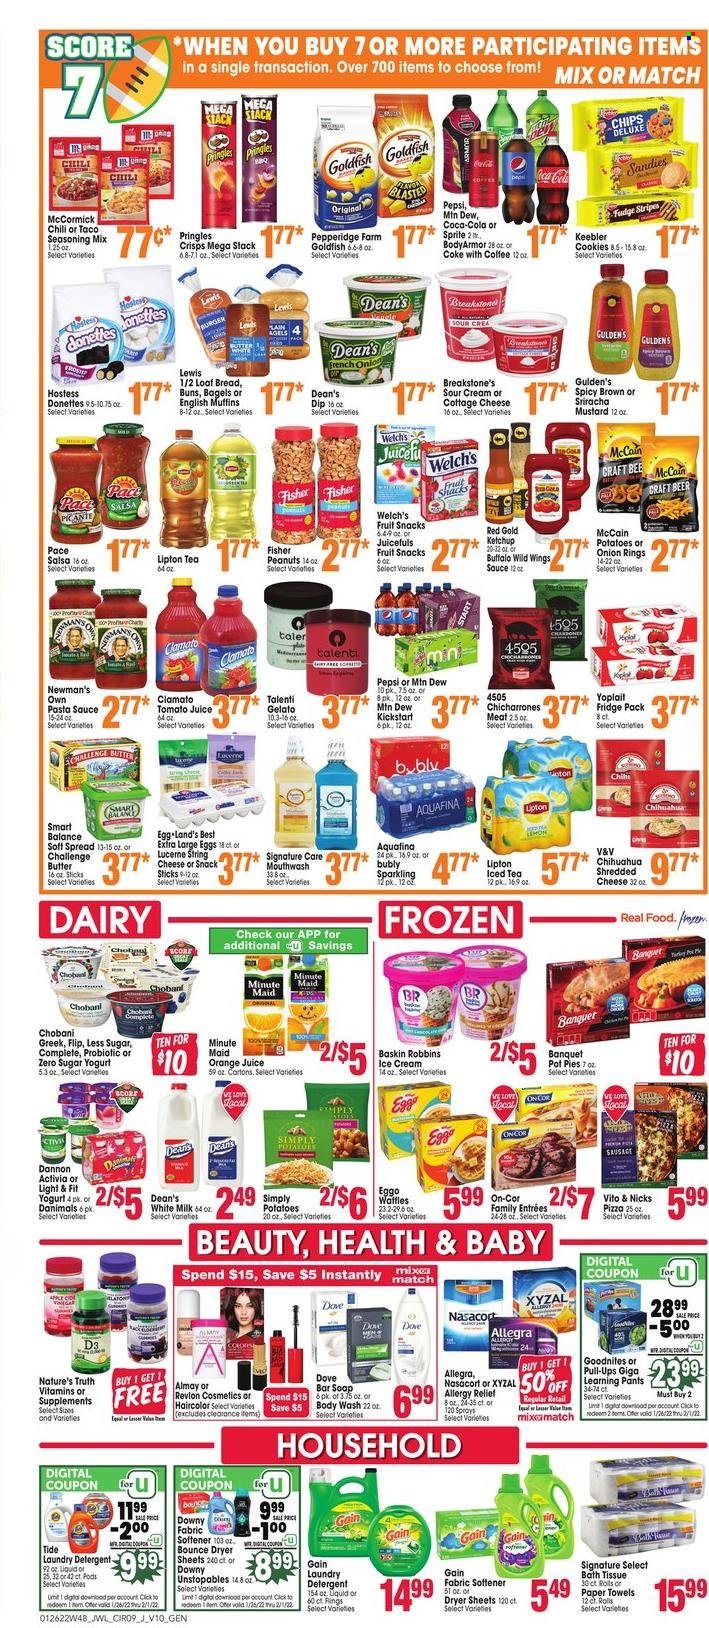 thumbnail - Jewel Osco Flyer - 01/26/2022 - 02/01/2022 - Sales products - bagels, english muffins, buns, pot pie, kale, potatoes, Welch's, pizza, pasta sauce, onion rings, sauce, sausage, cottage cheese, shredded cheese, string cheese, yoghurt, Activia, Yoplait, Chobani, Dannon, milk, large eggs, butter, sour cream, dip, ice cream, Talenti Gelato, gelato, McCain, cookies, fudge, fruit snack, Keebler, Pringles, Goldfish, spice, mustard, sriracha, ketchup, salsa, peanuts, Coca-Cola, Mountain Dew, Sprite, tomato juice, Pepsi, orange juice, juice, Lipton, ice tea, Clamato, fruit punch, Aquafina, coffee, beer, pants, Dove, bath tissue, kitchen towels, paper towels, detergent, Gain, Tide, Unstopables, fabric softener, laundry detergent, Bounce, dryer sheets, body wash, soap bar, soap, mouthwash, Almay, Revlon, Nature's Truth, vitamin D3. Page 9.